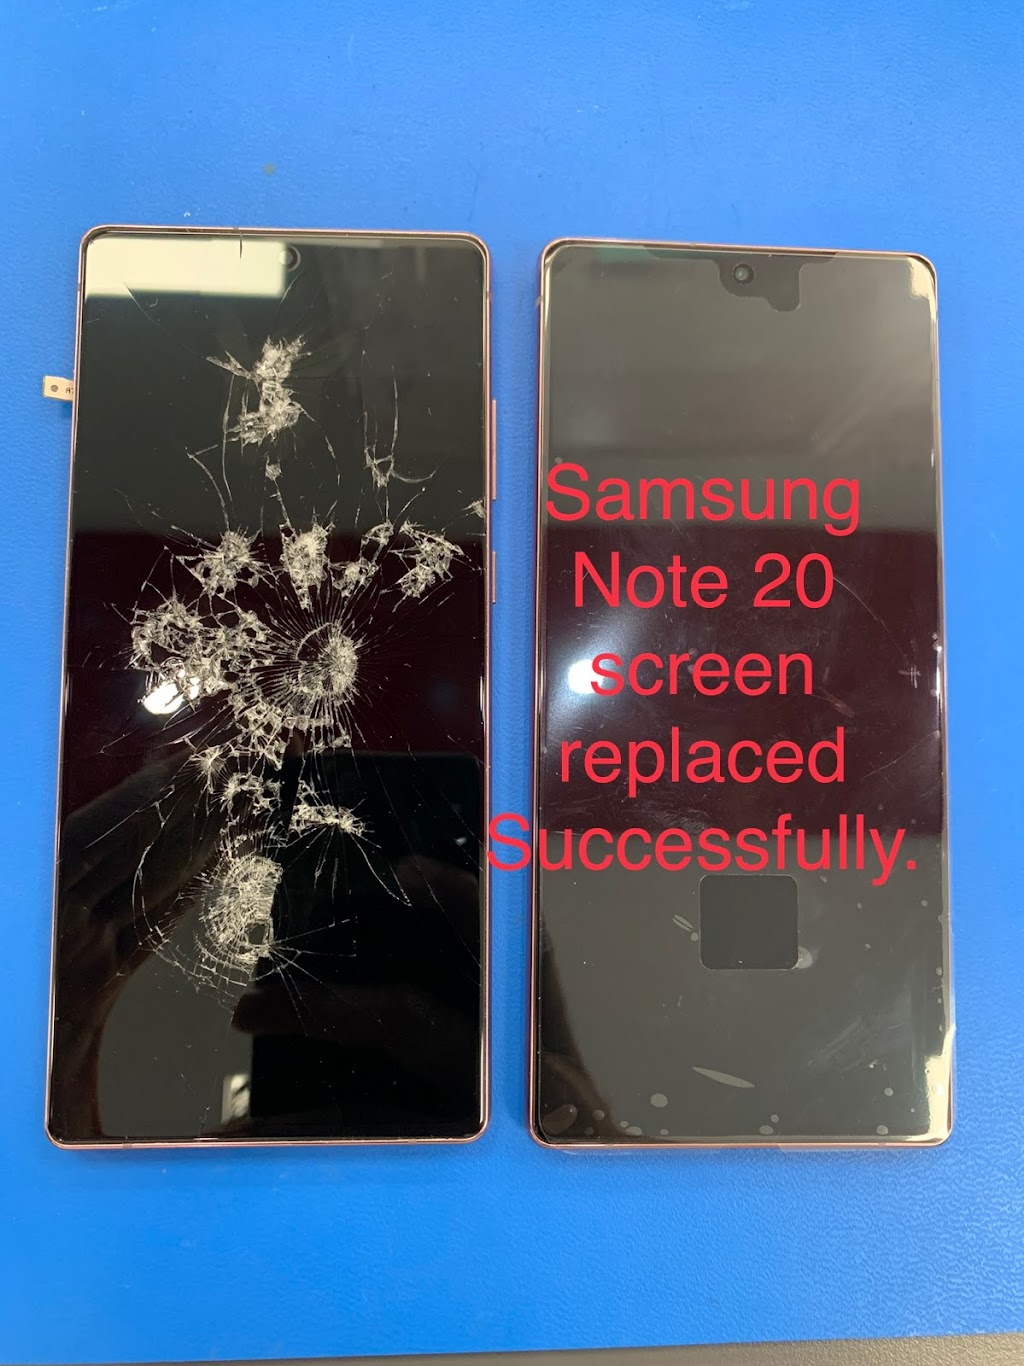 247 Cell Repairs - Vancouver # 1 Cell Phone Repair | 388 E 49th Ave, Vancouver, BC V5W 2G6, Canada | Phone: (250) 251-7862